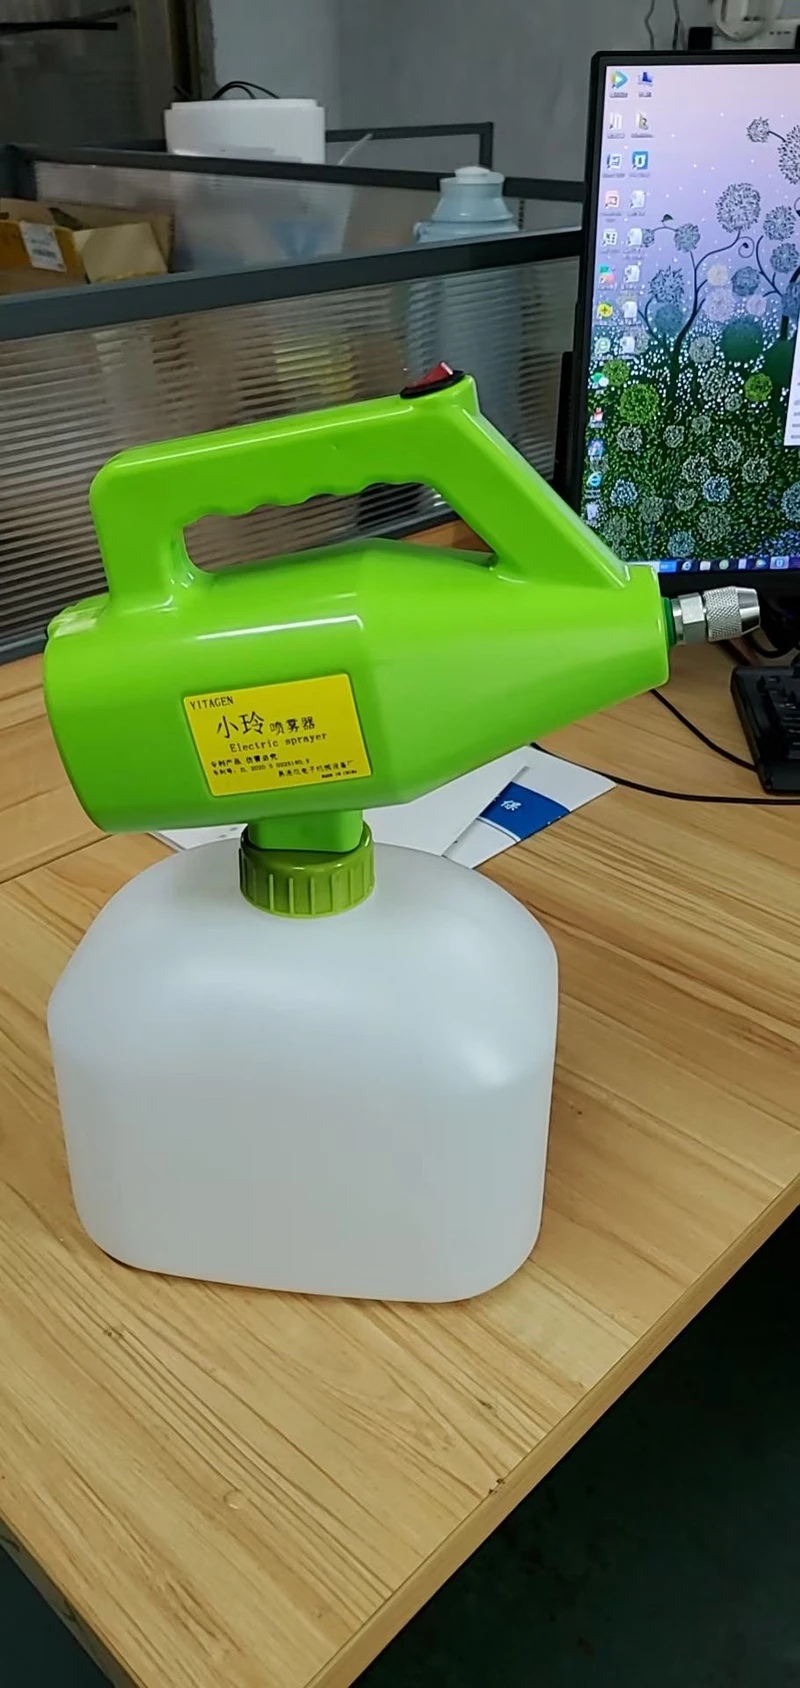 Rechargeable Lithium Battery Ultra-low Volume Electric Sprayer Atomizer Mosquito Fogging Machine